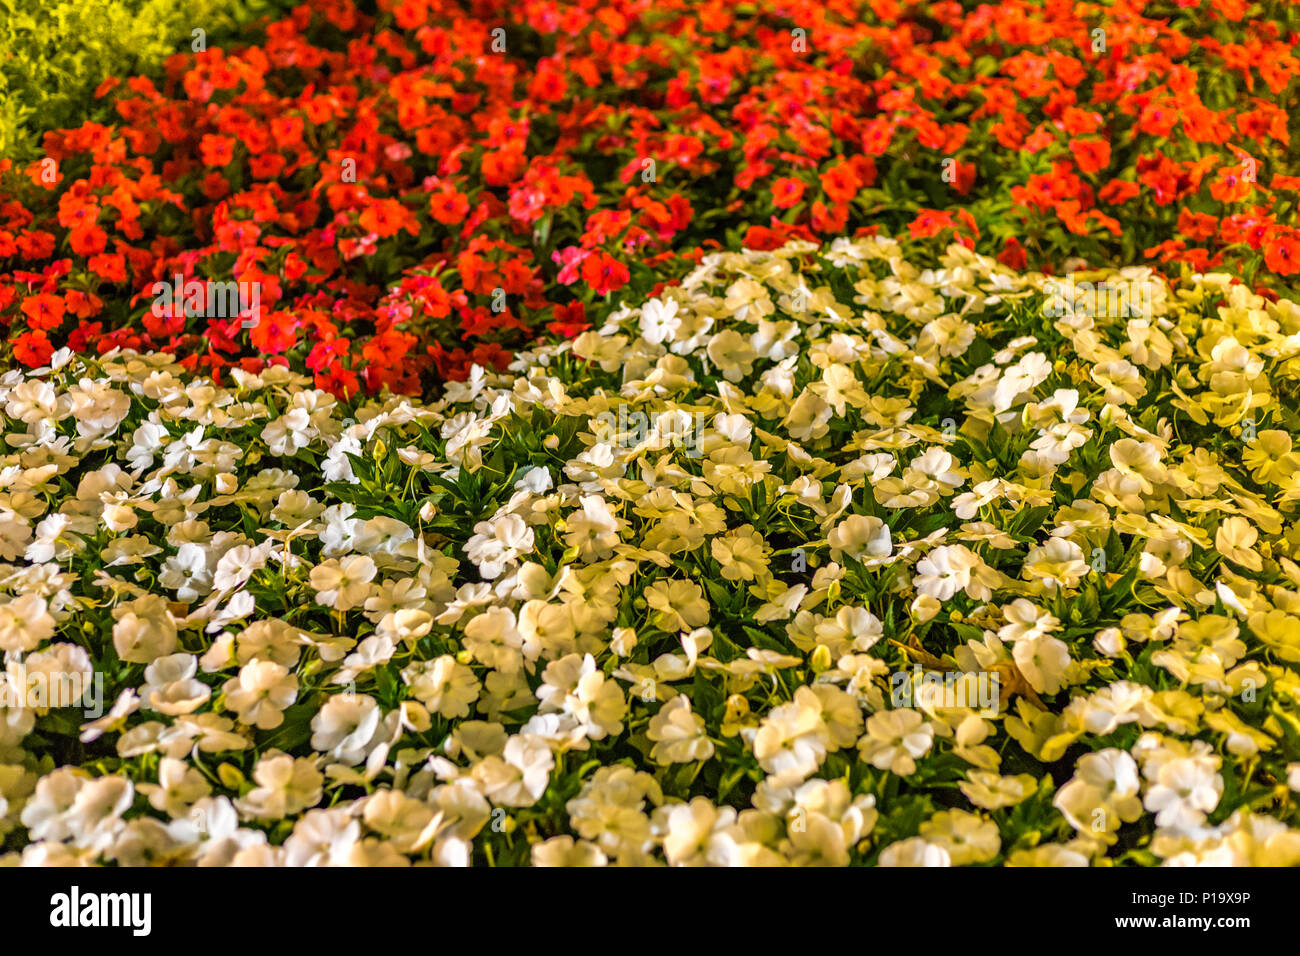 background of red and white flowers with green leaves Stock Photo